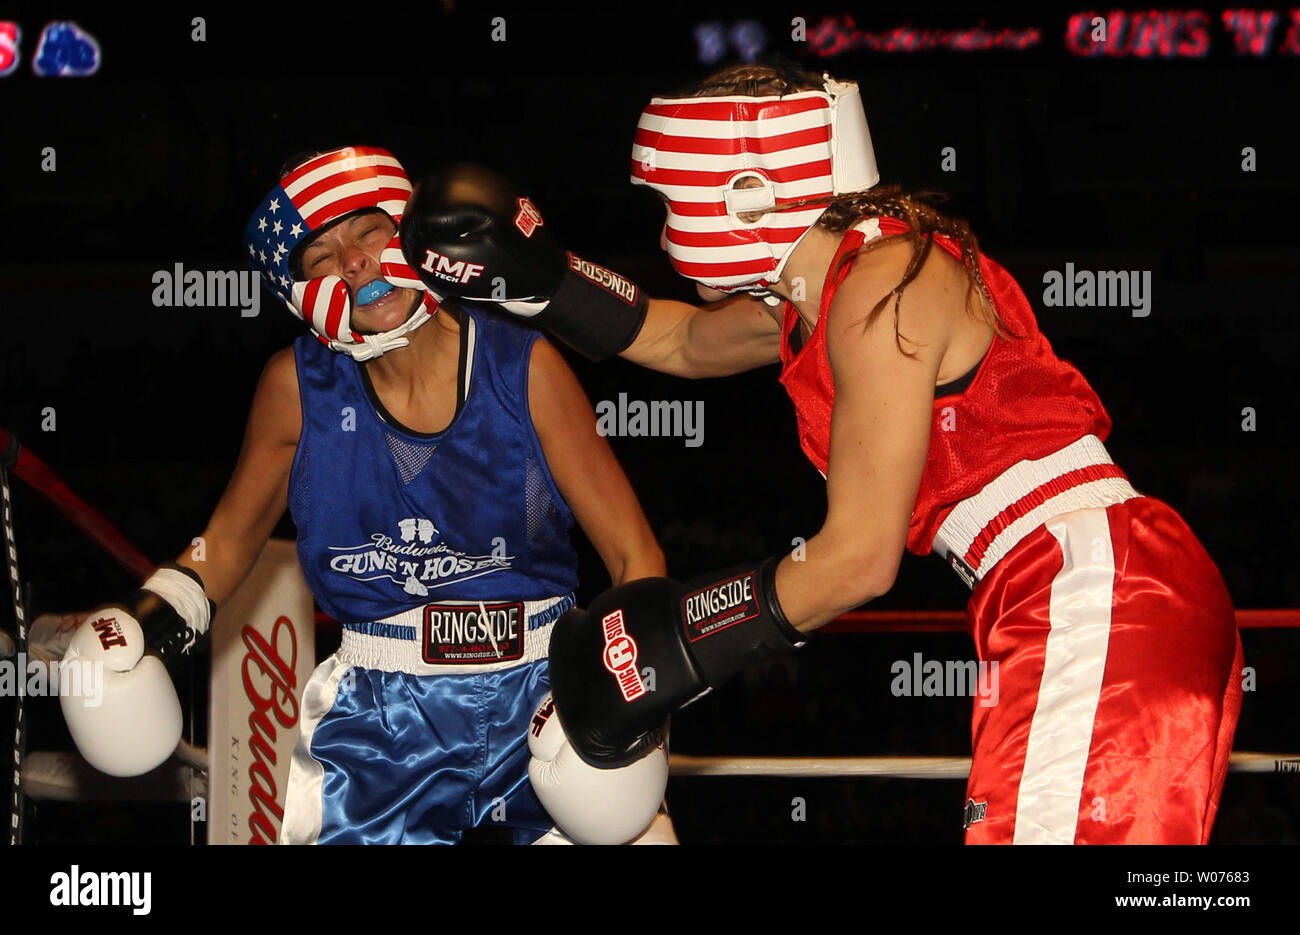 Kelly Kennon of the Union Fire Department connects to the face of Julie Reynolds of the St. Louis Police Department in the first round of the Guns and Hoses Boxing Showdown in St. Louis on November 21, 2012. The annual event in its 26th year, benefit the familys of police, firefighters and EMS personel that have been killed in the line of duty.   UPI/Bill Greenblatt Stock Photo